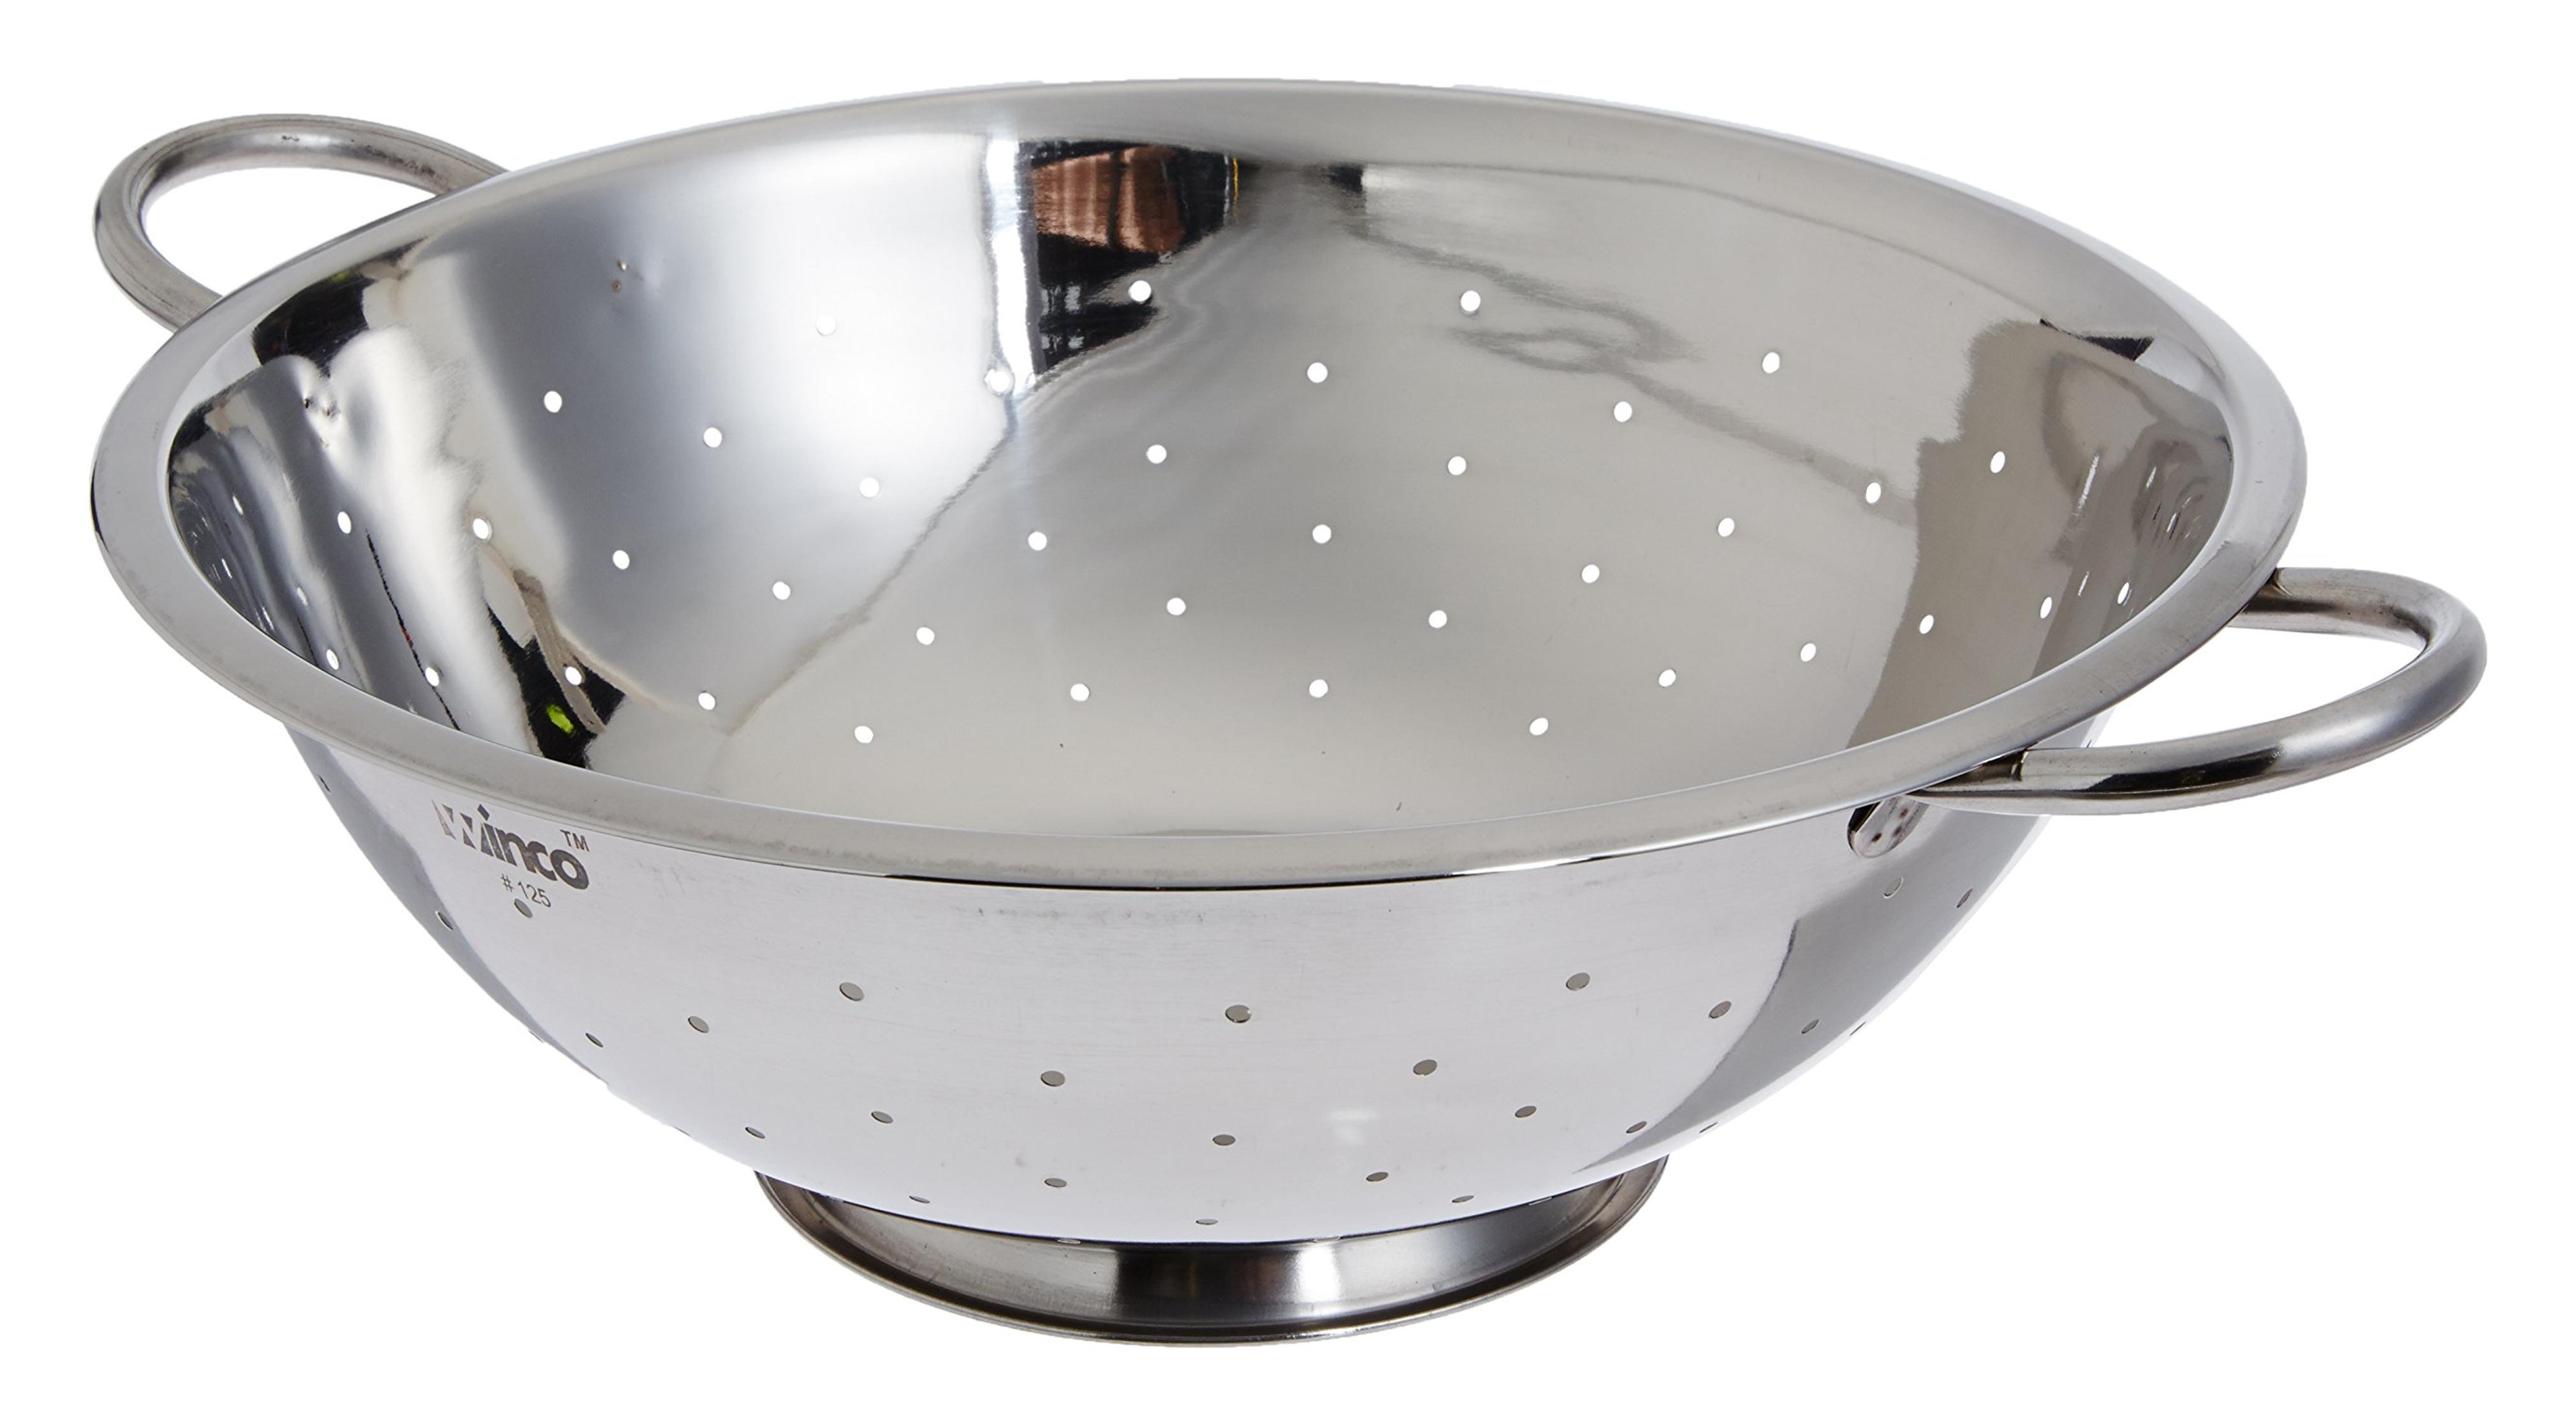 Amazon.com: Winco Stainless Steel Colander with Base, 8-Quart : Home & Kitchen